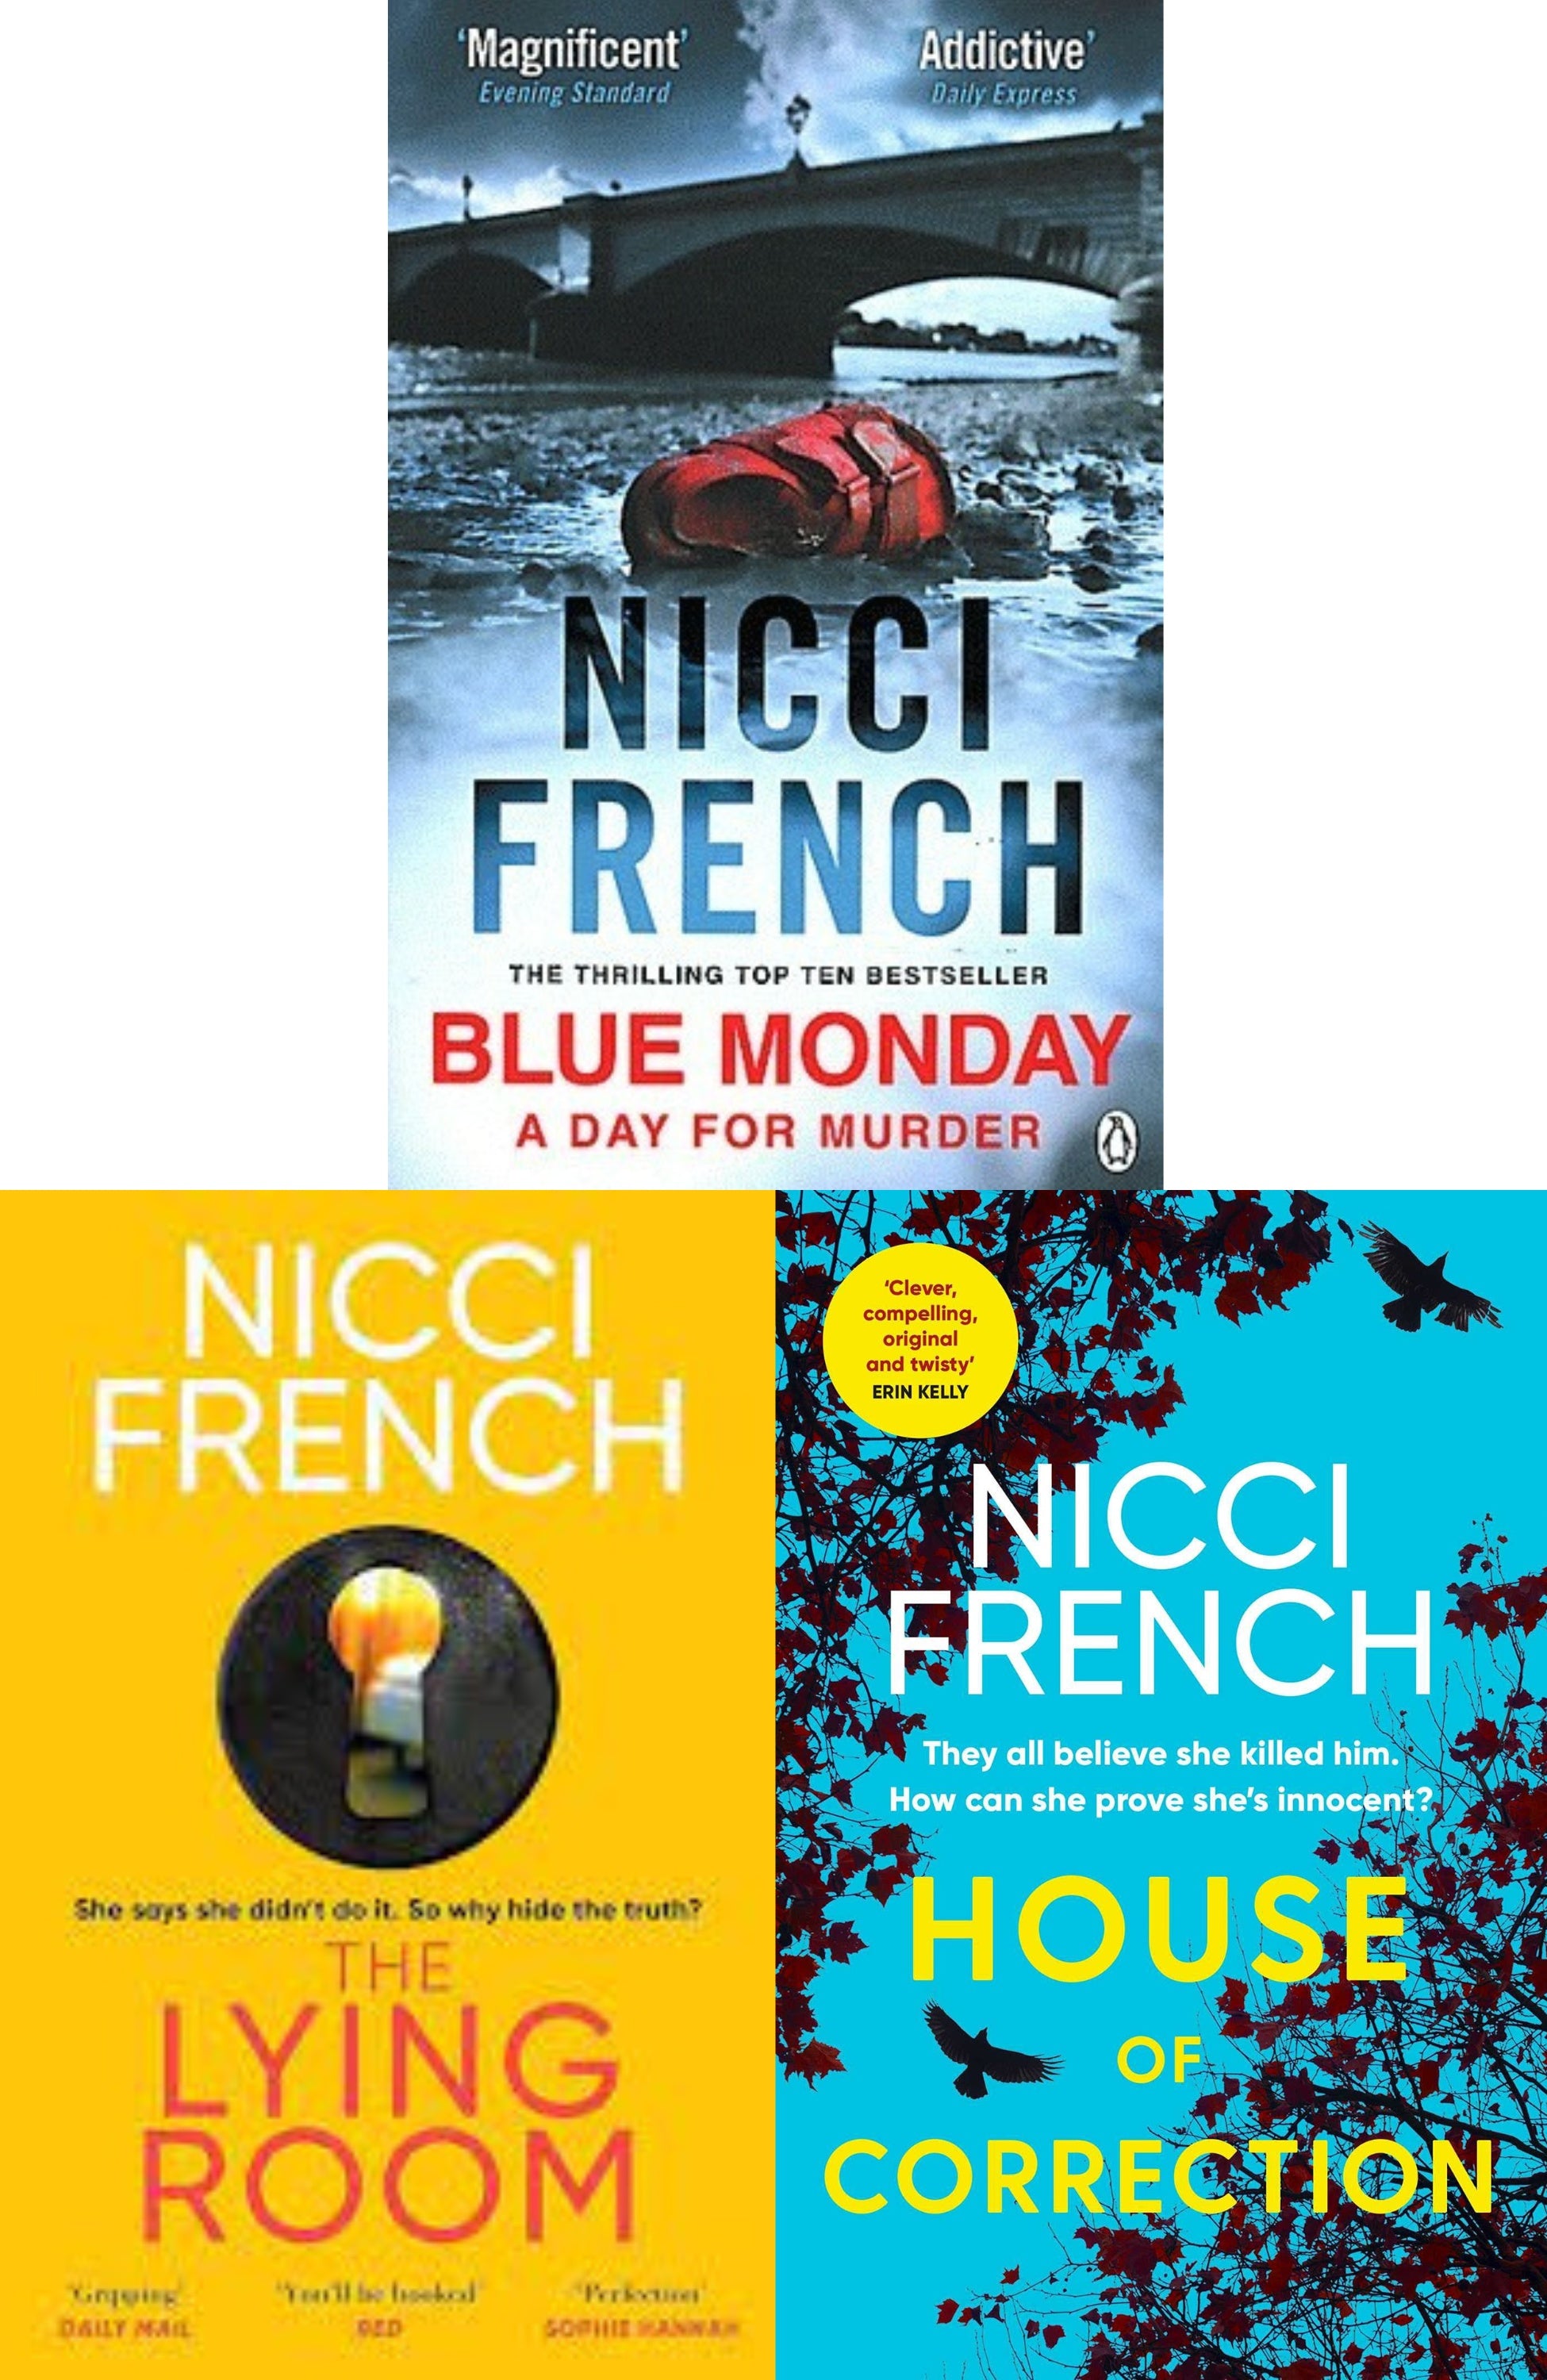 Nicci French  Book Combo ( House Of Correction, Blue Monday, The Lying Room, Friday on My Mind )